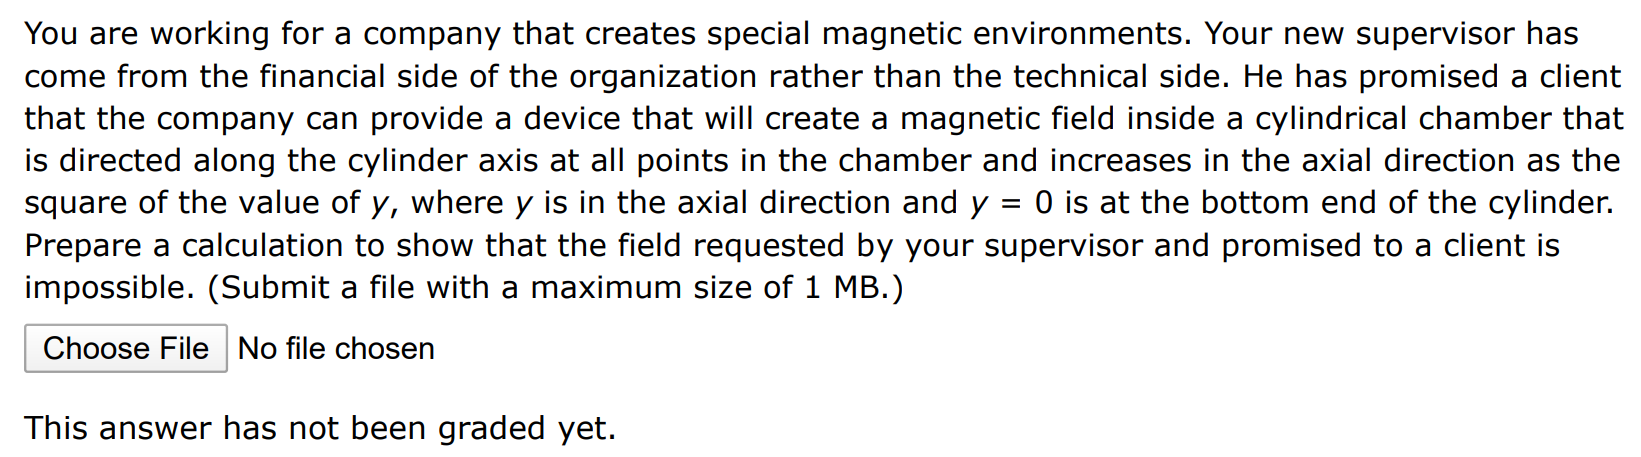 You are working for a company that creates special magnetic environments. Your new supervisor has come from the financial side of the organization rather than the technical side. He has promised a client that the company can provide a device that will create a magnetic field inside a cylindrical chamber that is directed along the cylinder axis at all points in the chamber and increases in the axial direction as the square of the value of y, where y is in the axial direction and y = 0 is at the bottom end of the cylinder. Prepare a calculation to show that the field requested by your supervisor and promised to a client is impossible. (Submit a file with a maximum size of 1 MB.) Choose File No file chosen This answer has not been graded yet.